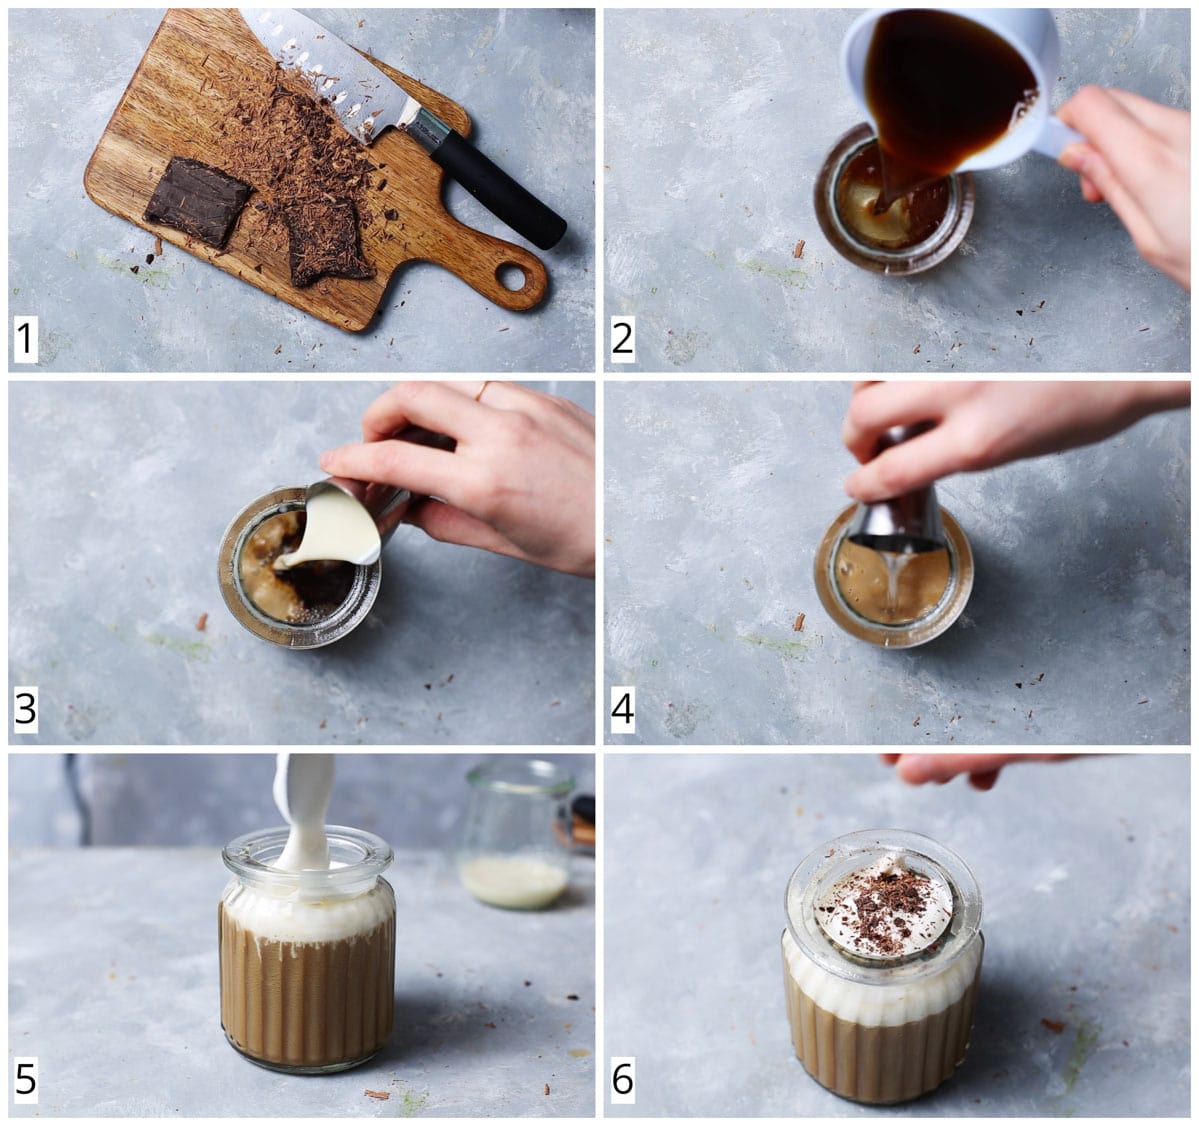 A collage of six images showing exactly how to make a coffee cocktail.